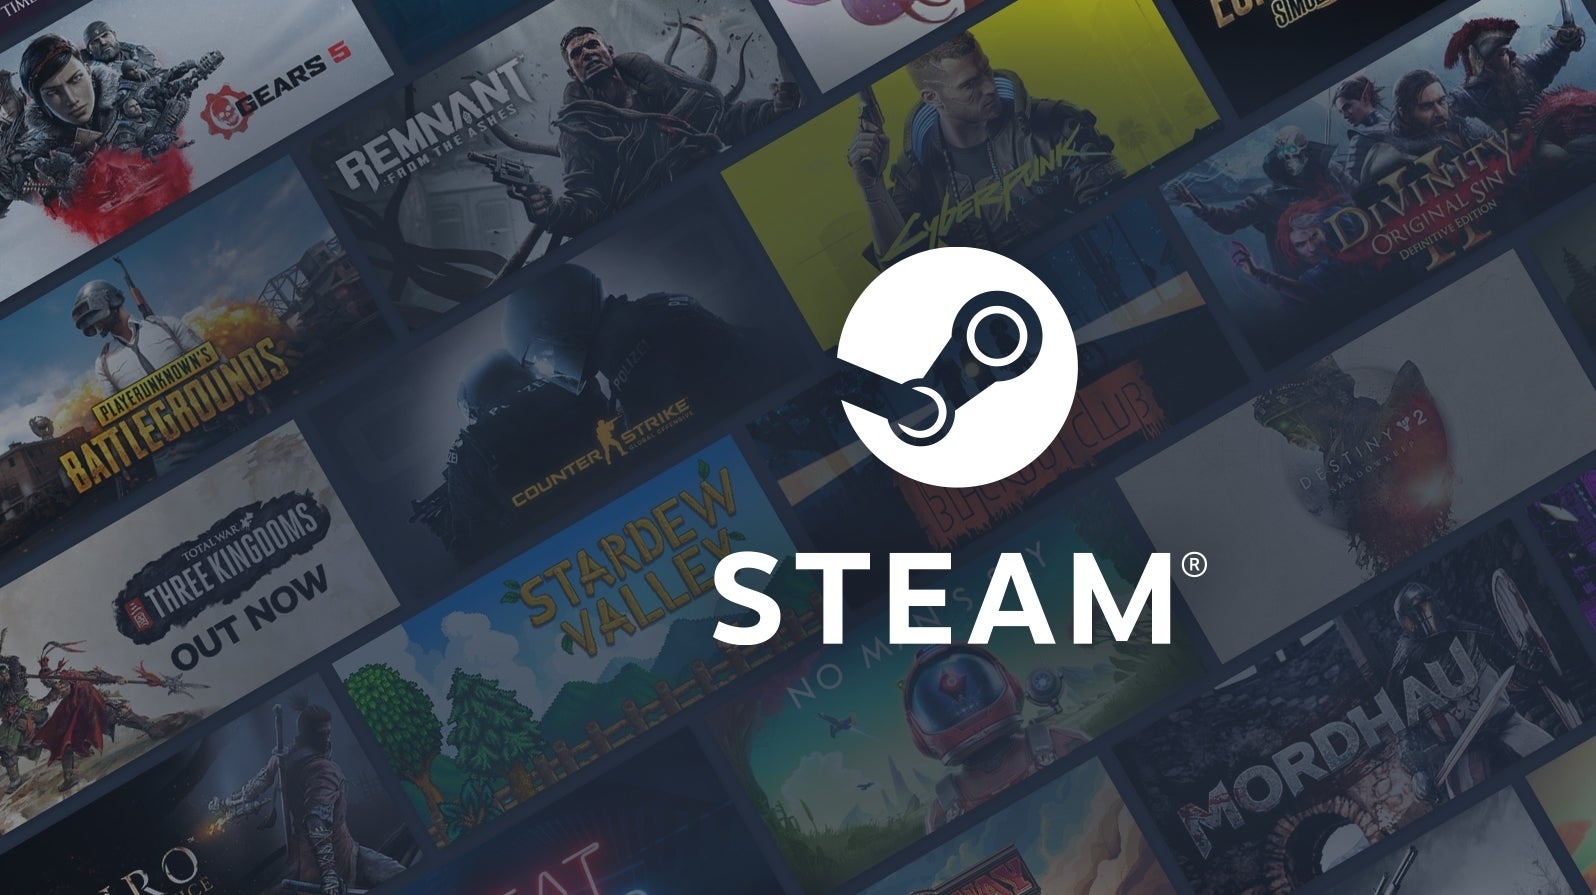 Image for The Steam Deck will perform equally well whether you're mobile or have it docked